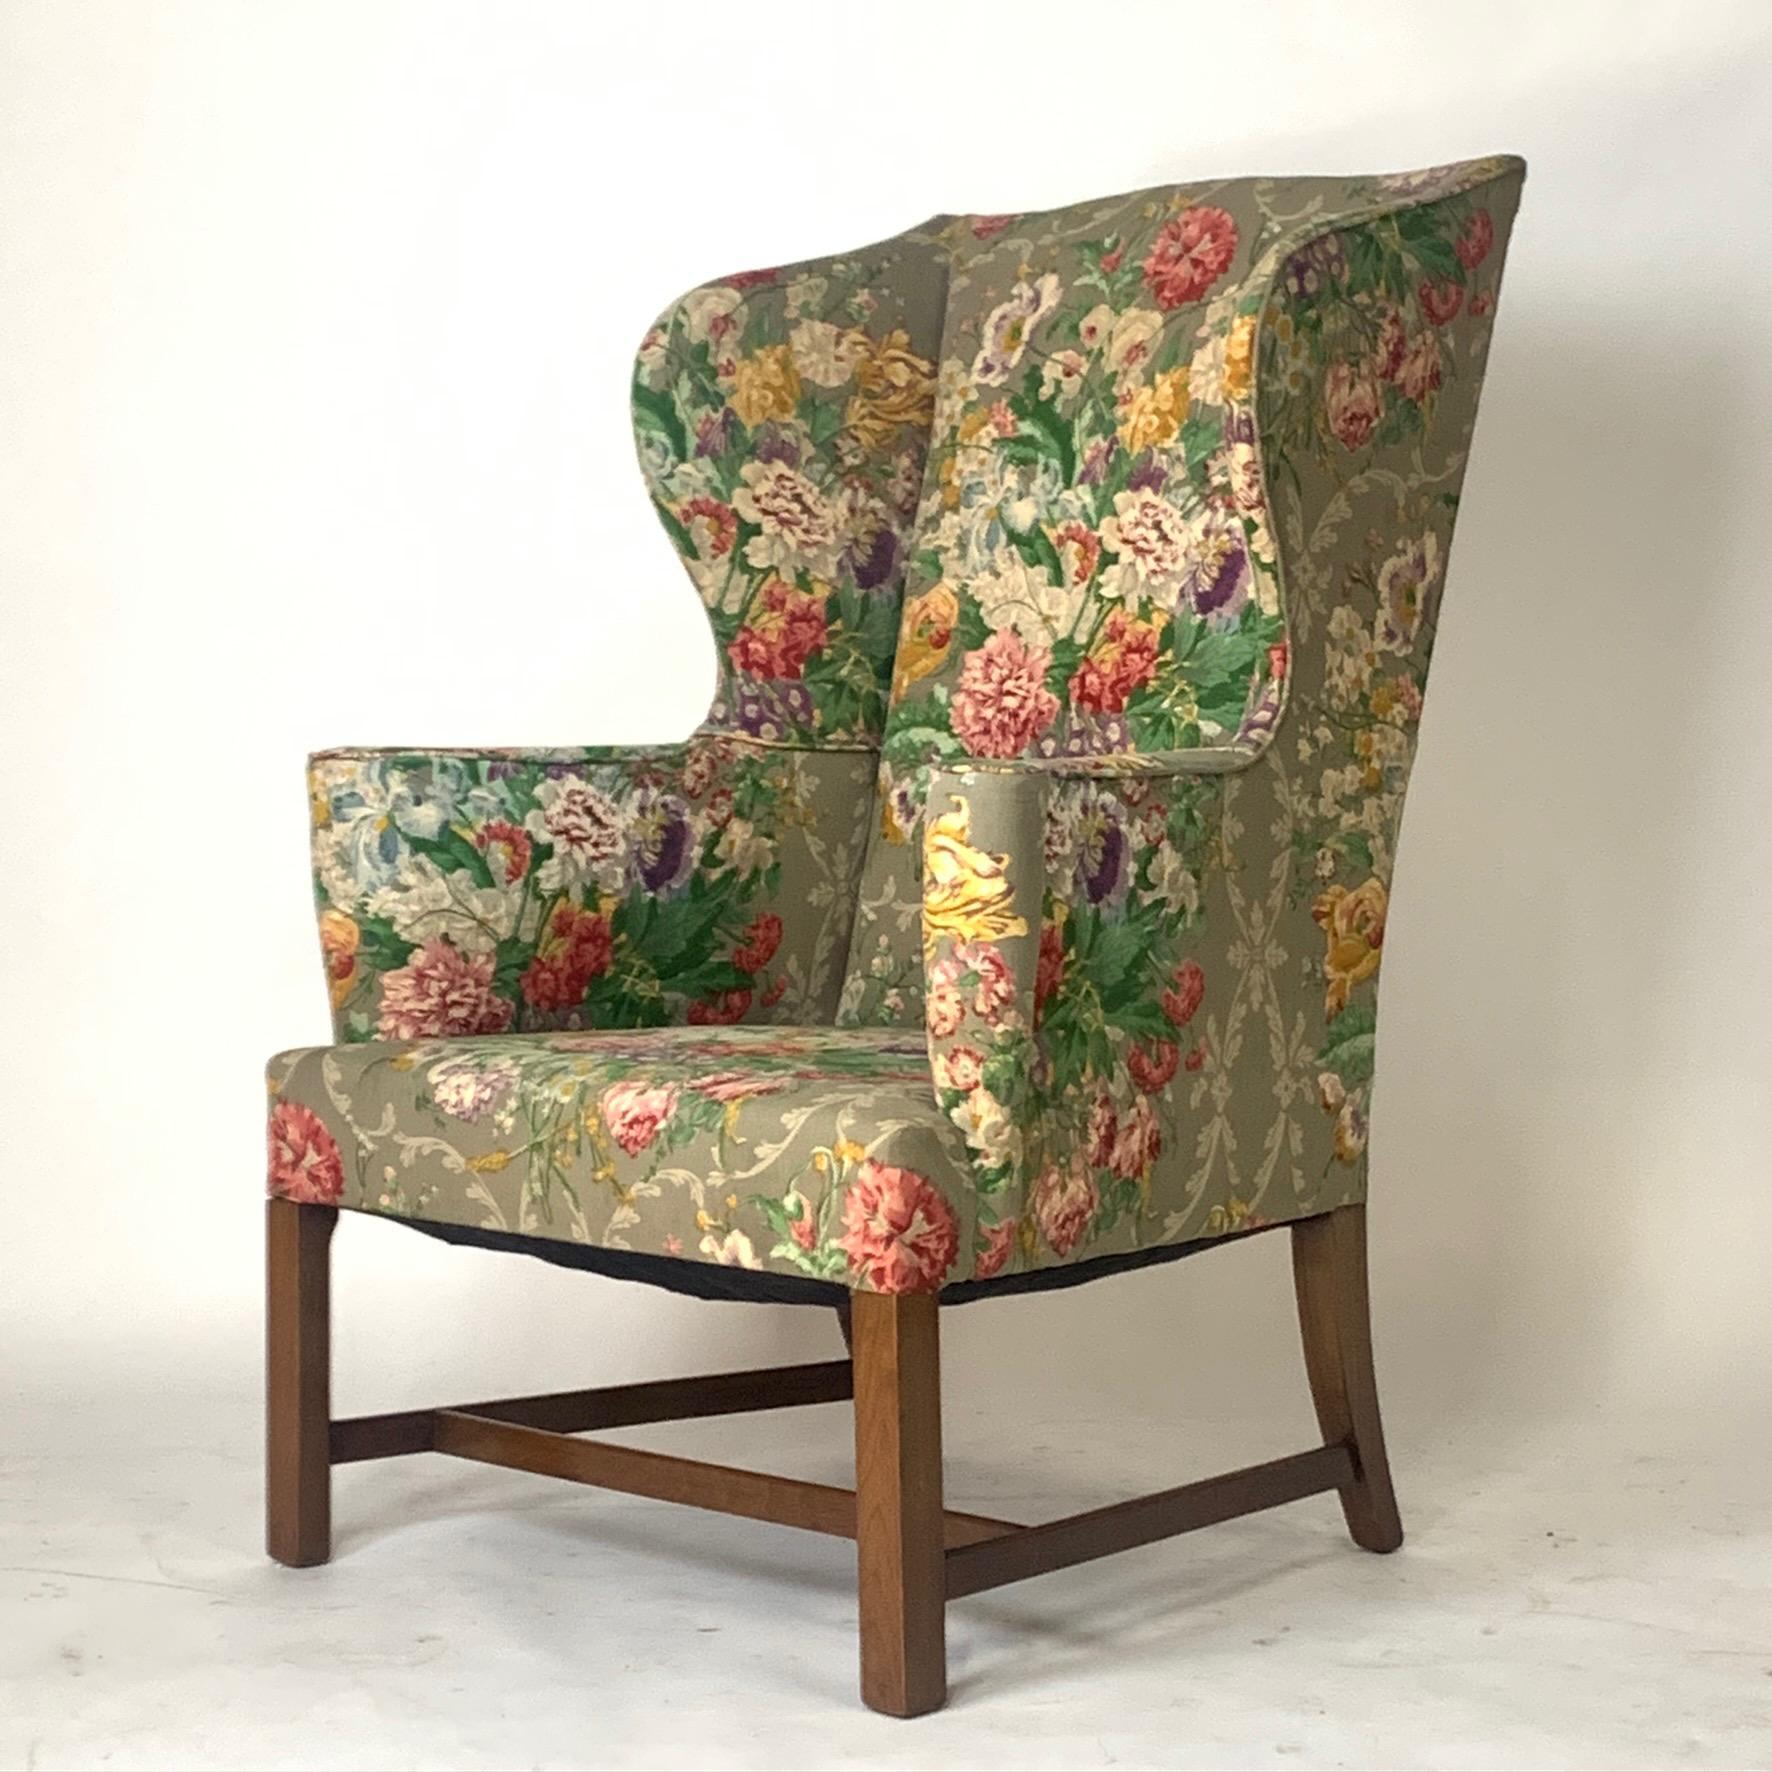 Exceptional Early American Wingback Chairs with Stunning Floral Upholstery 3